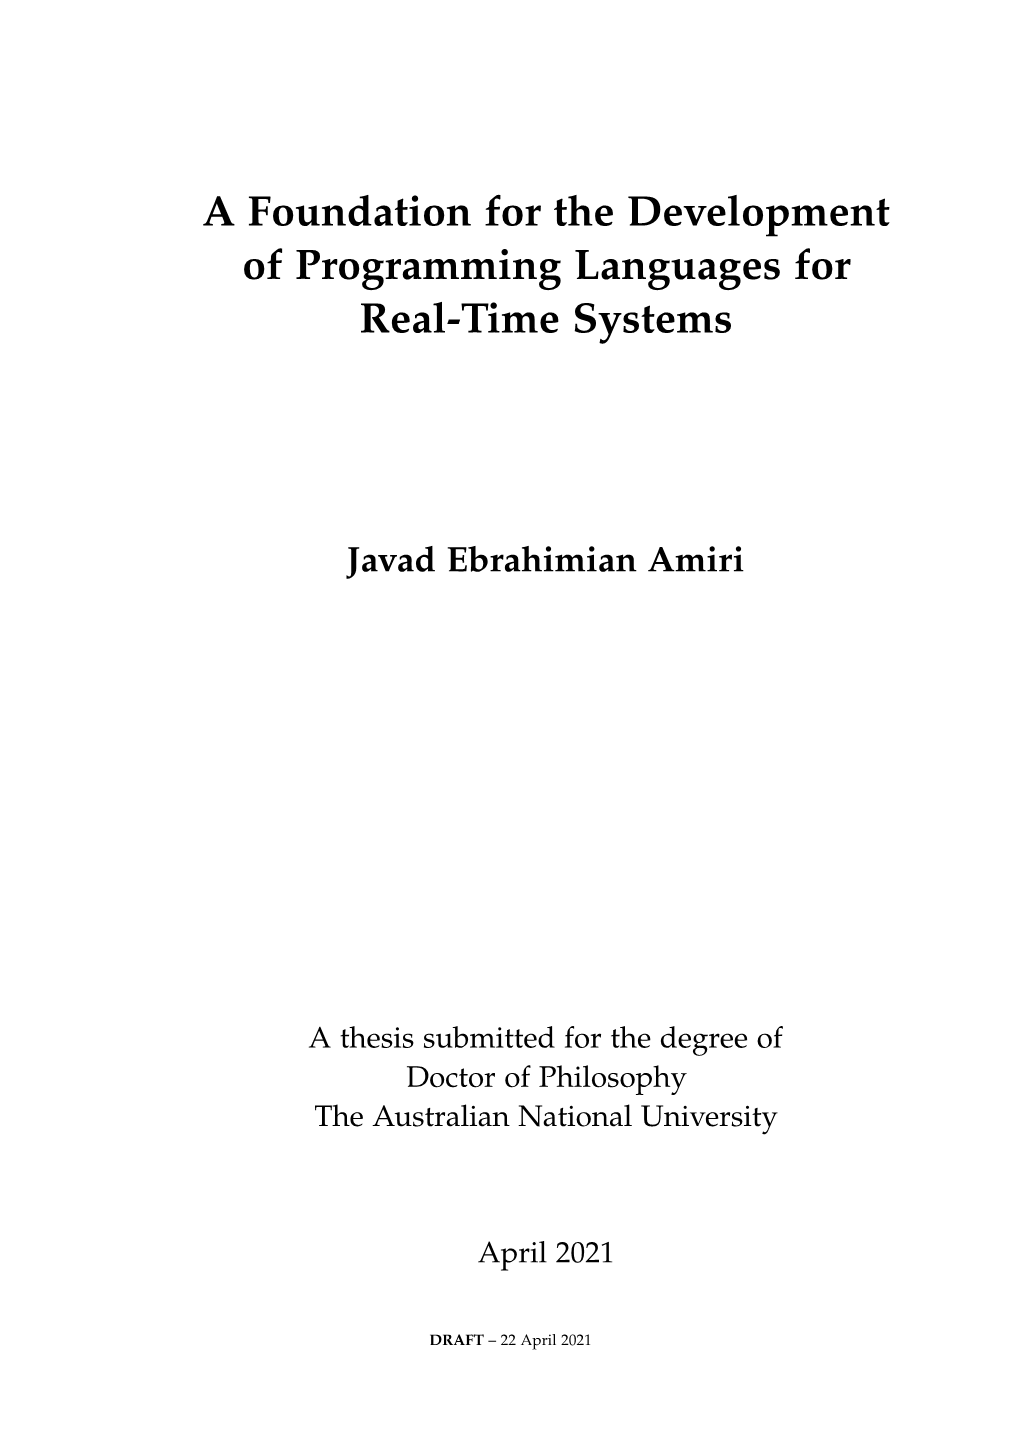 A Foundation for the Development of Programming Languages for Real-Time Systems